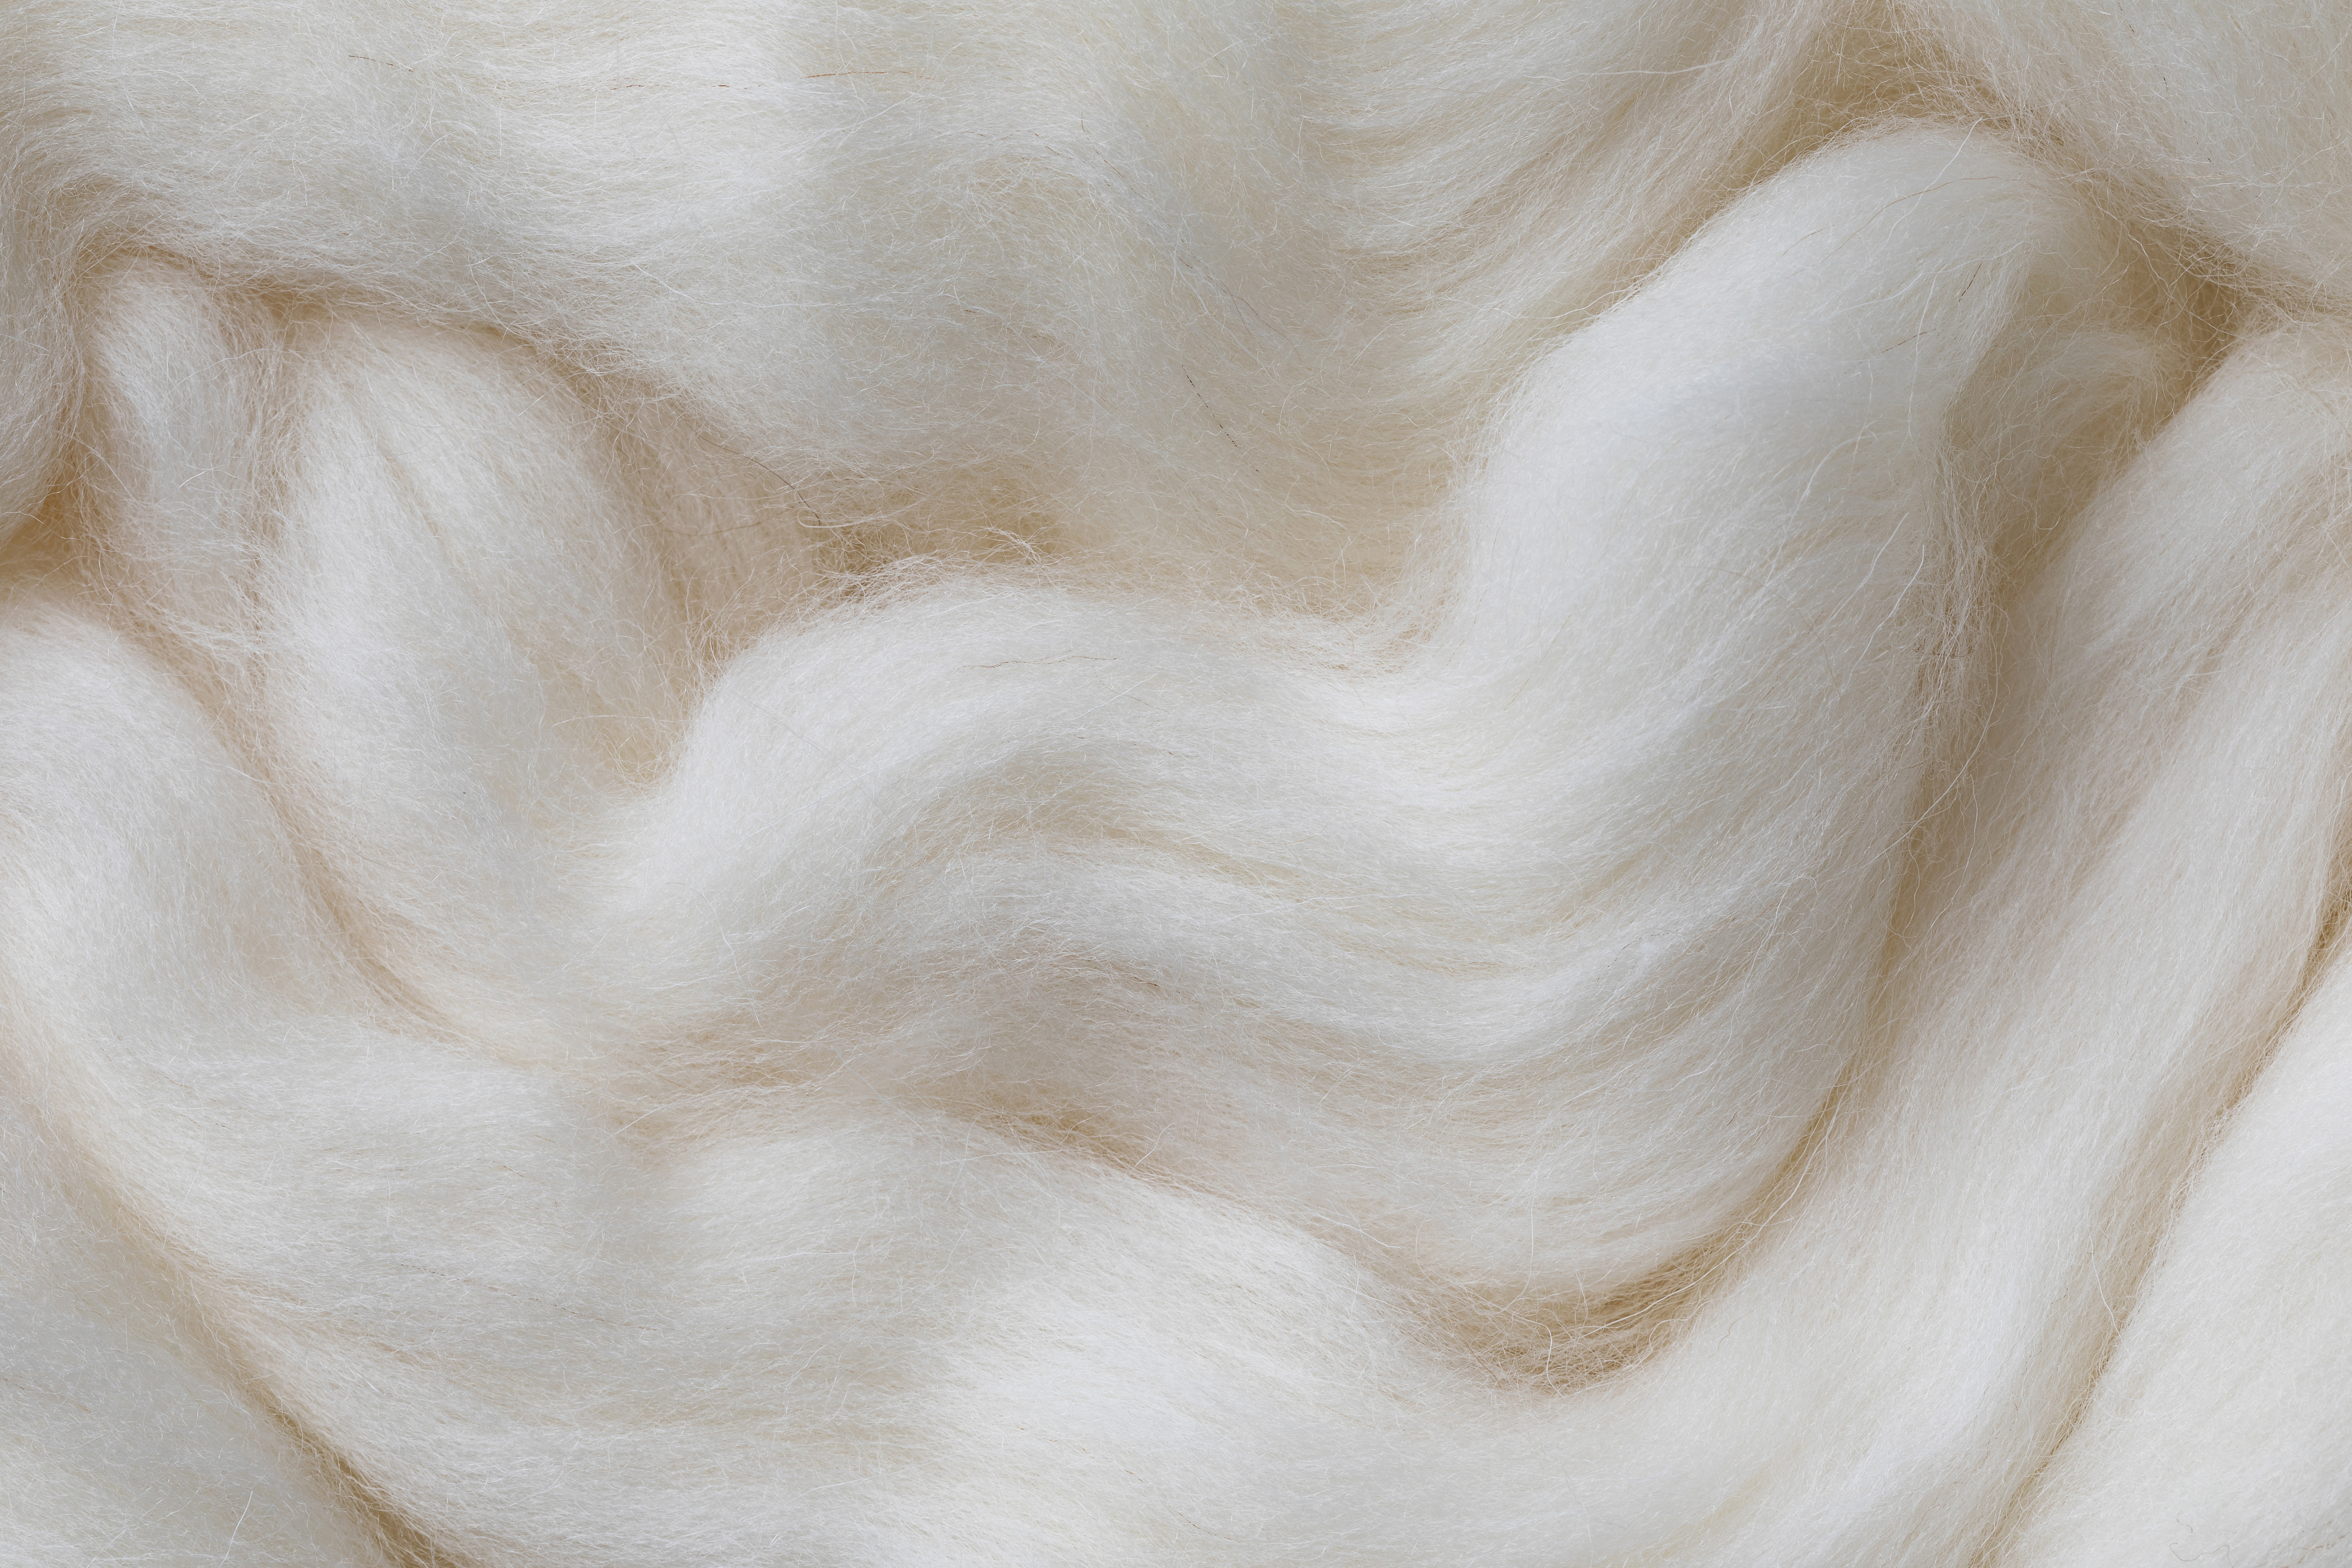 100% pure, natural and renewable wool